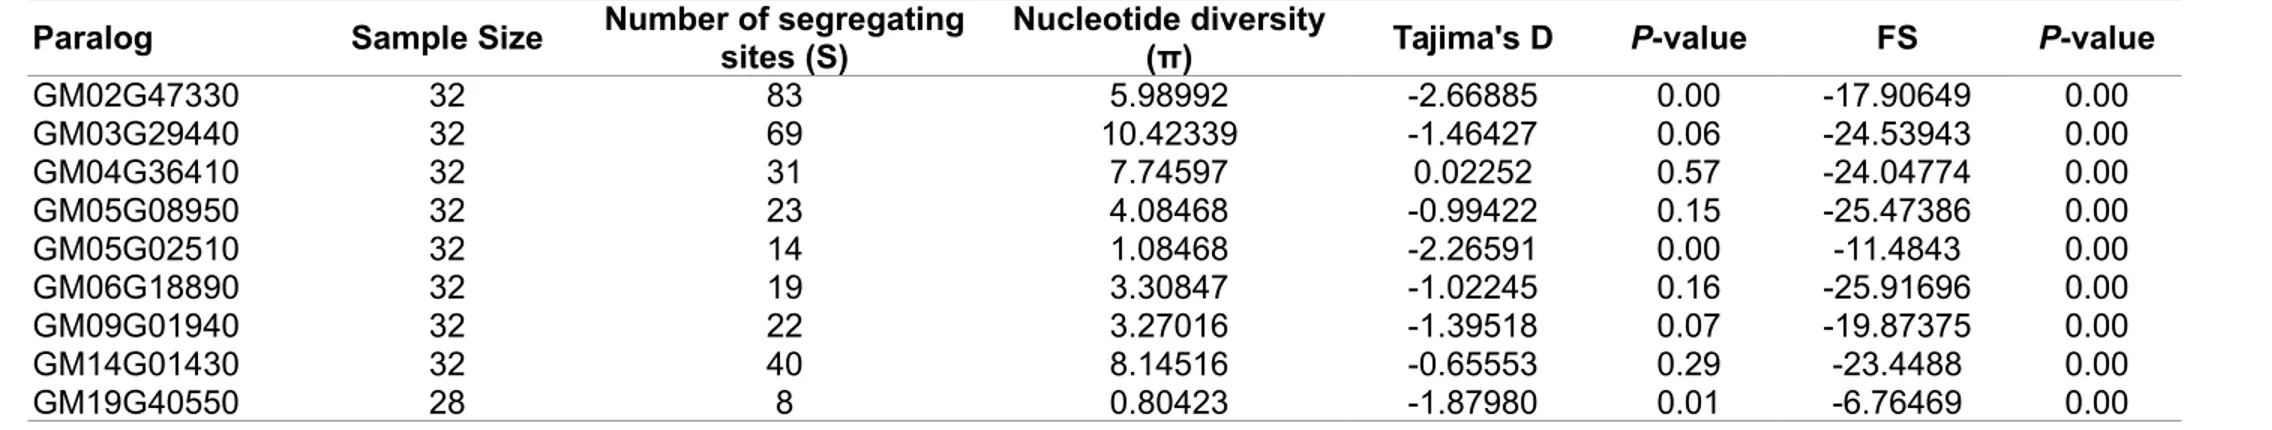 Table 2. Measures of nucleotide diversities and neutrality test statistics from coding-DNA sequence alignment of raffinose family  oligosaccharide (RFO) paralogs of soybeans.